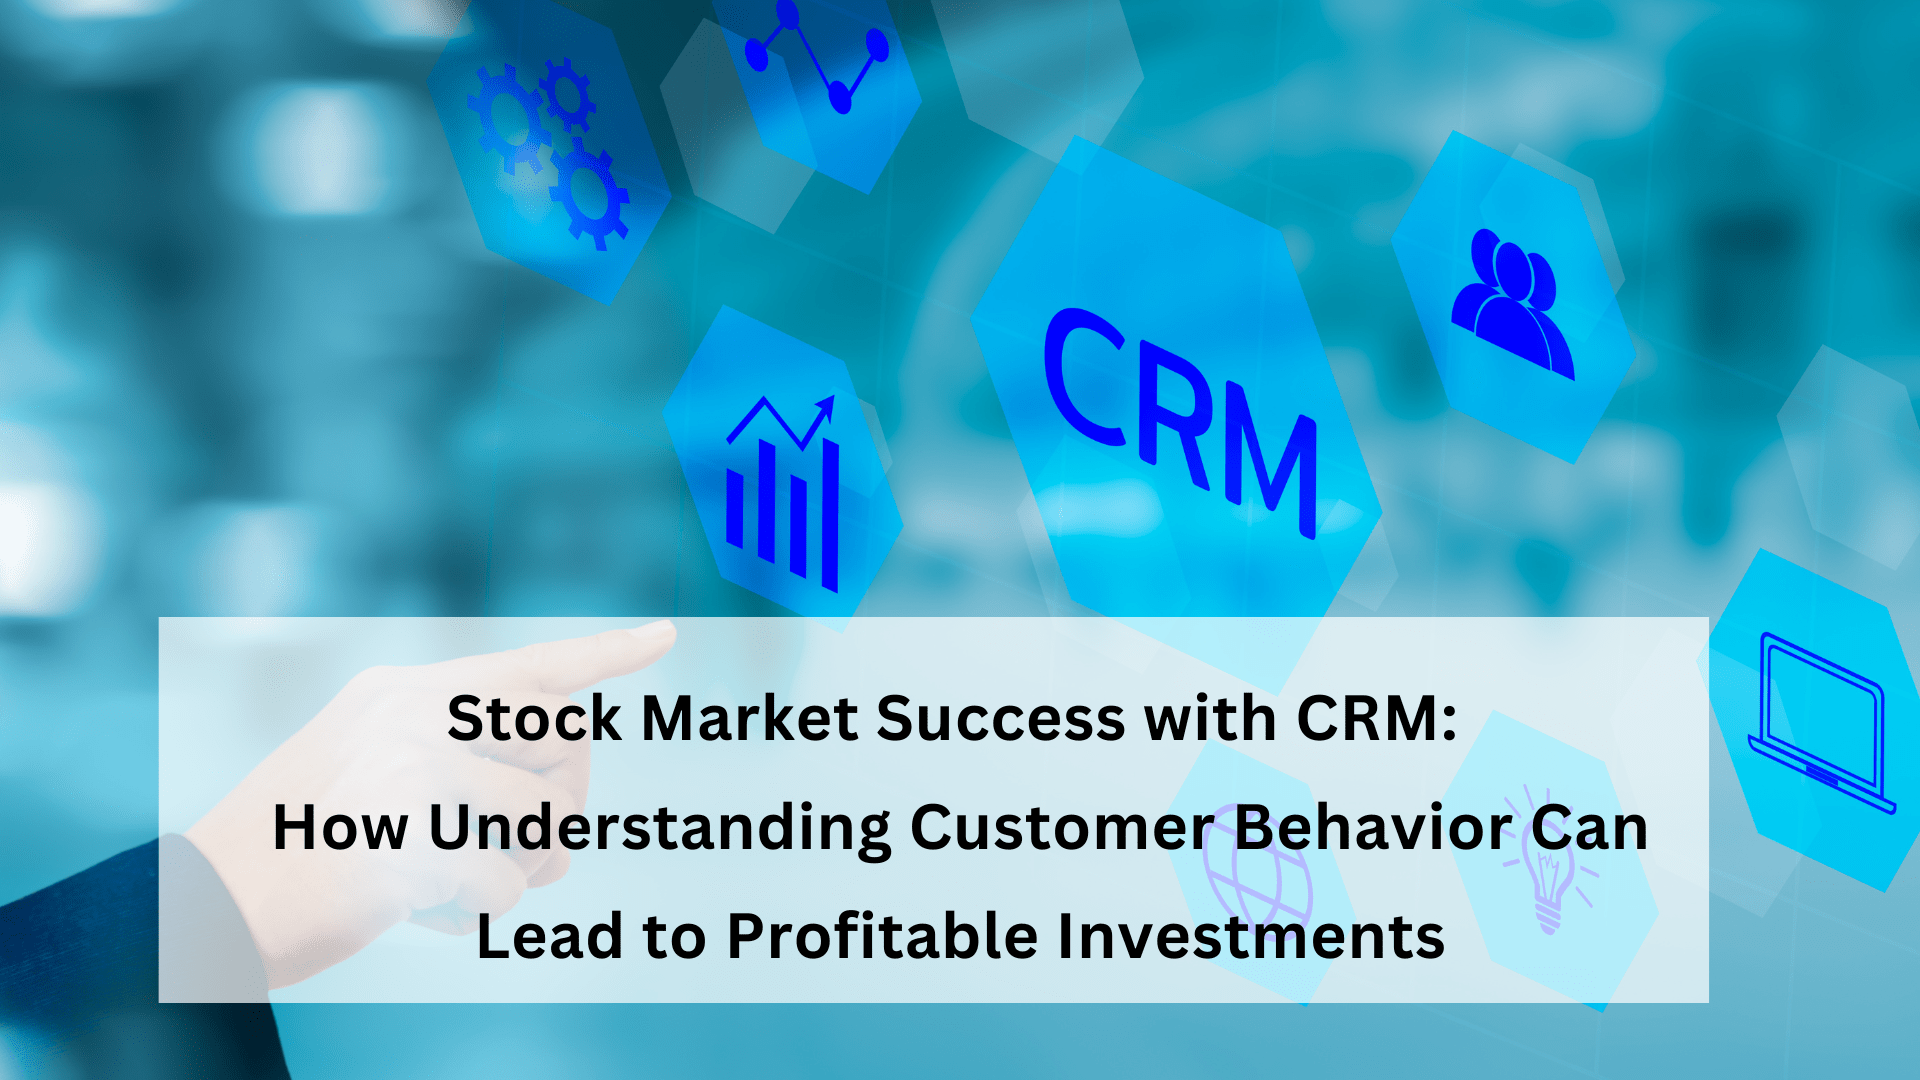 Stock Market Success with CRM: How Understanding Customer Behavior Can Lead to Profitable Investments